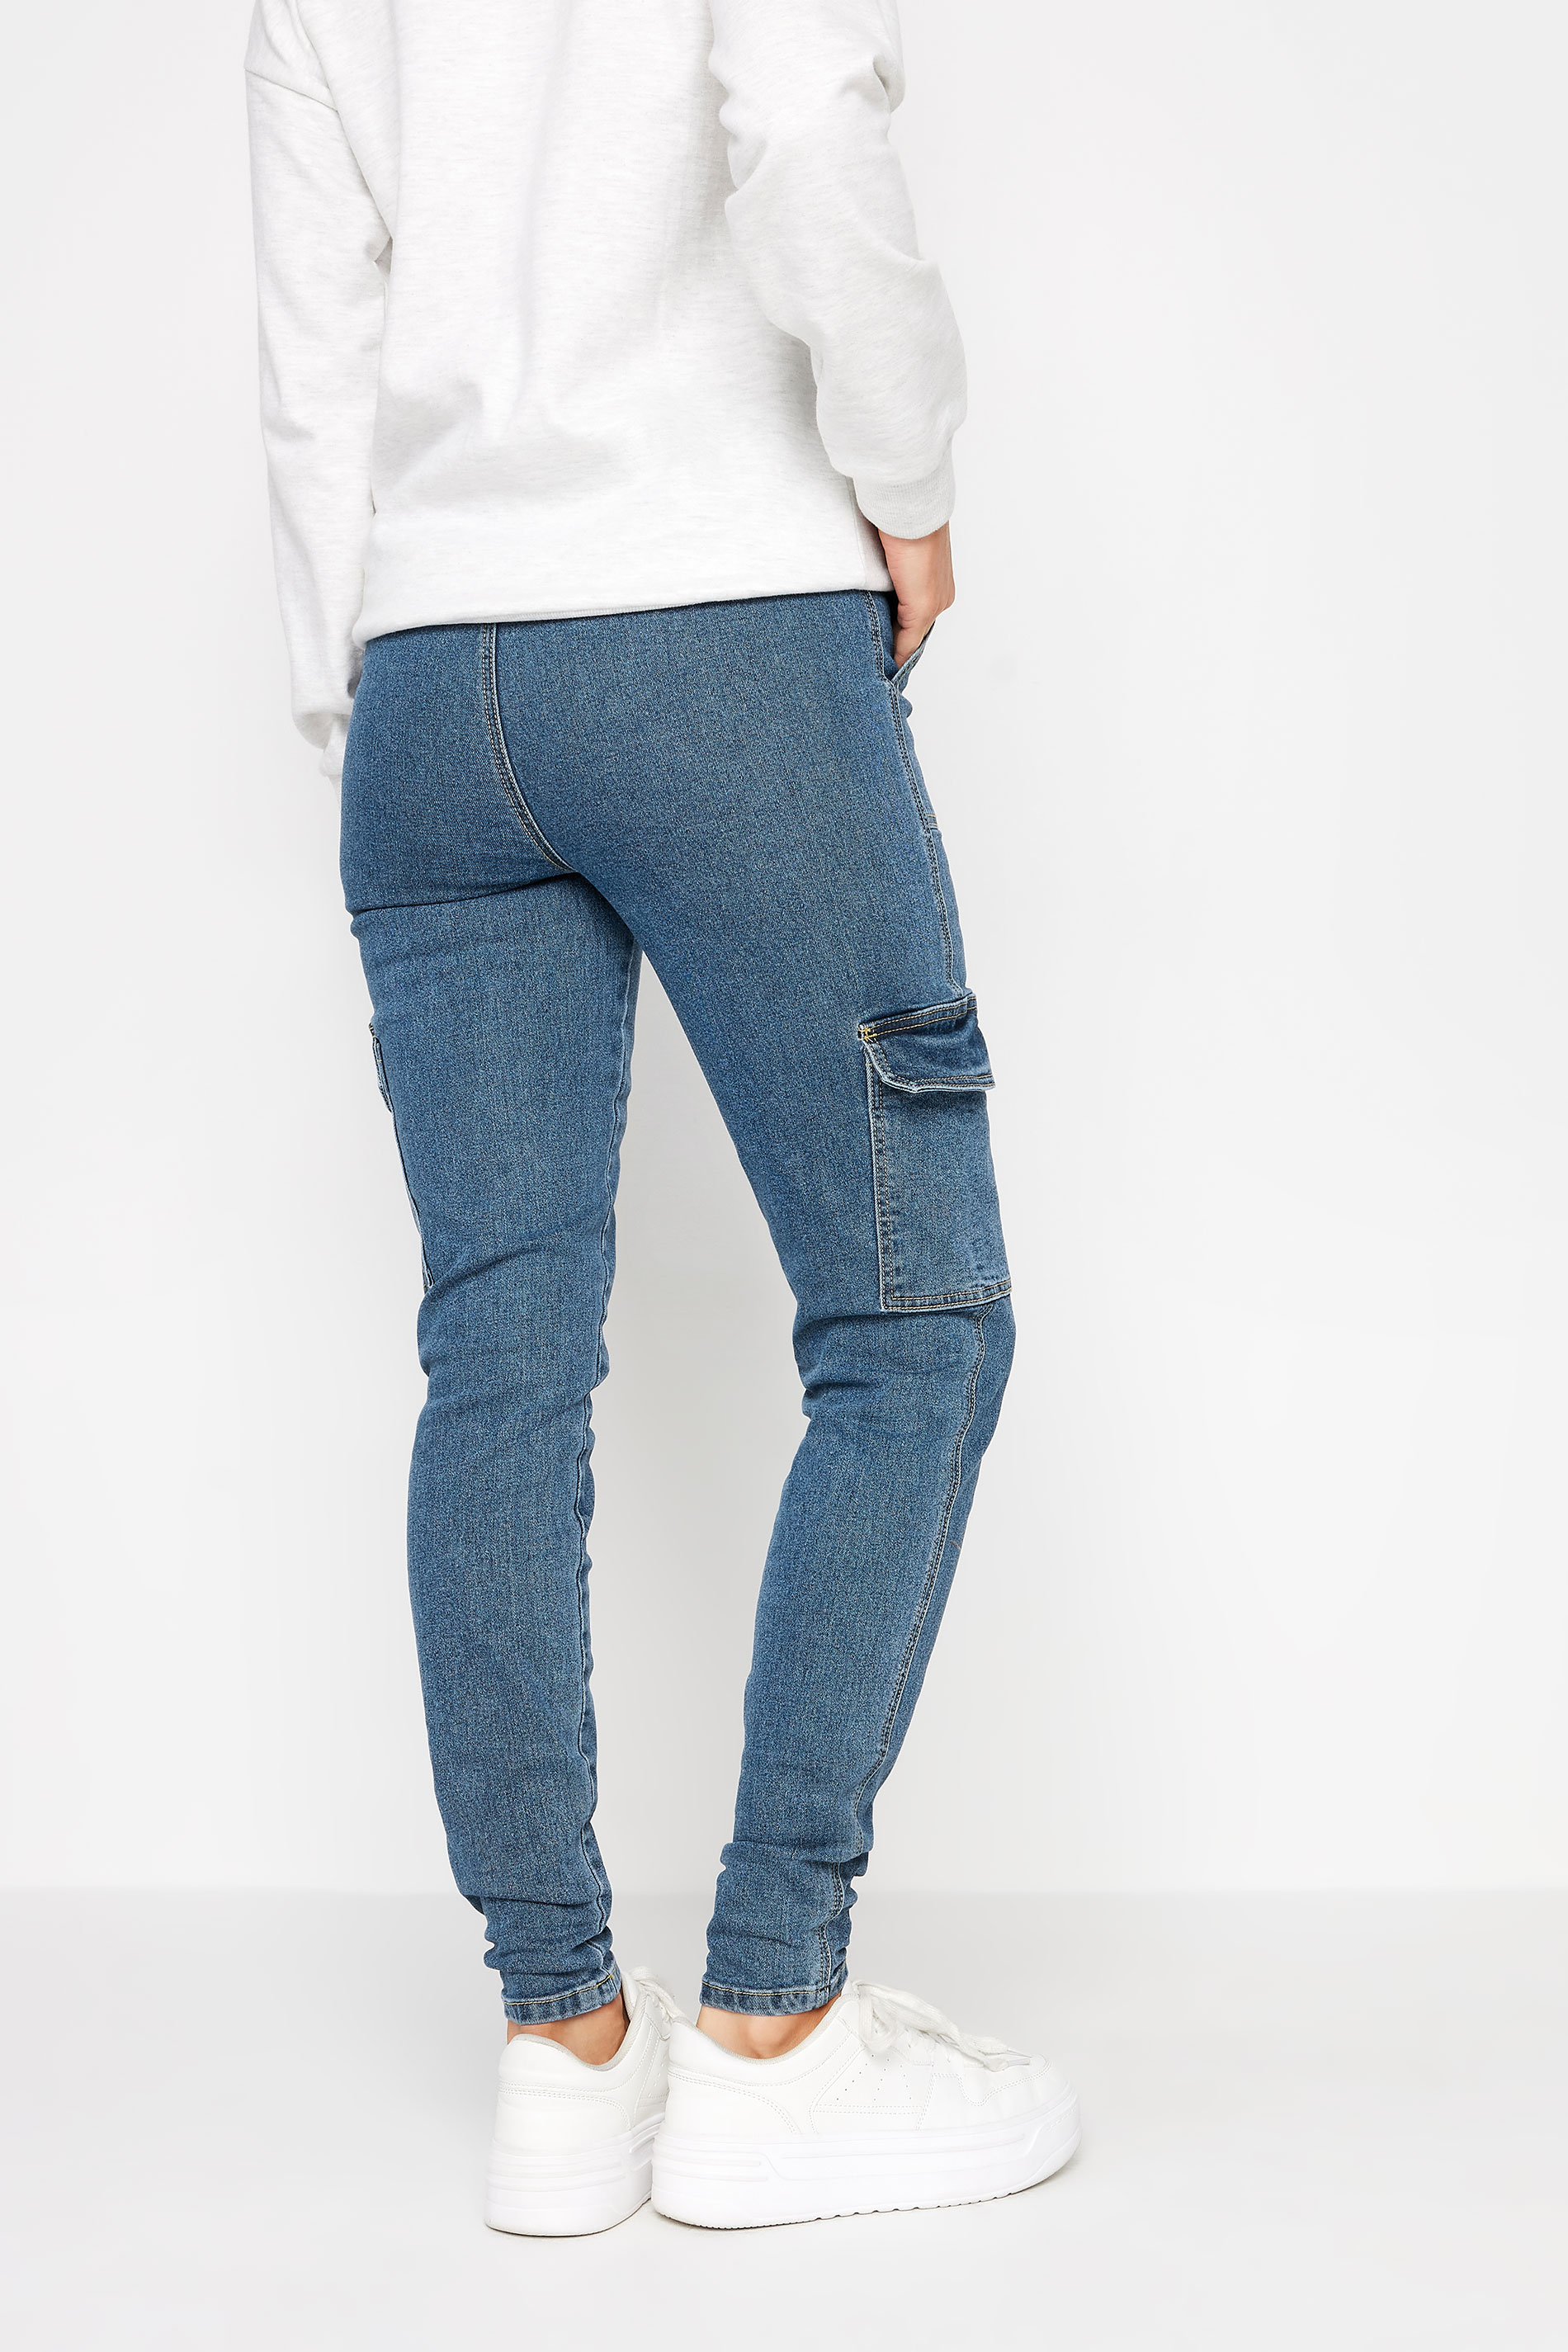 LTS Tall Blue Cargo Skinny Jeans | Long Tall Sally  3